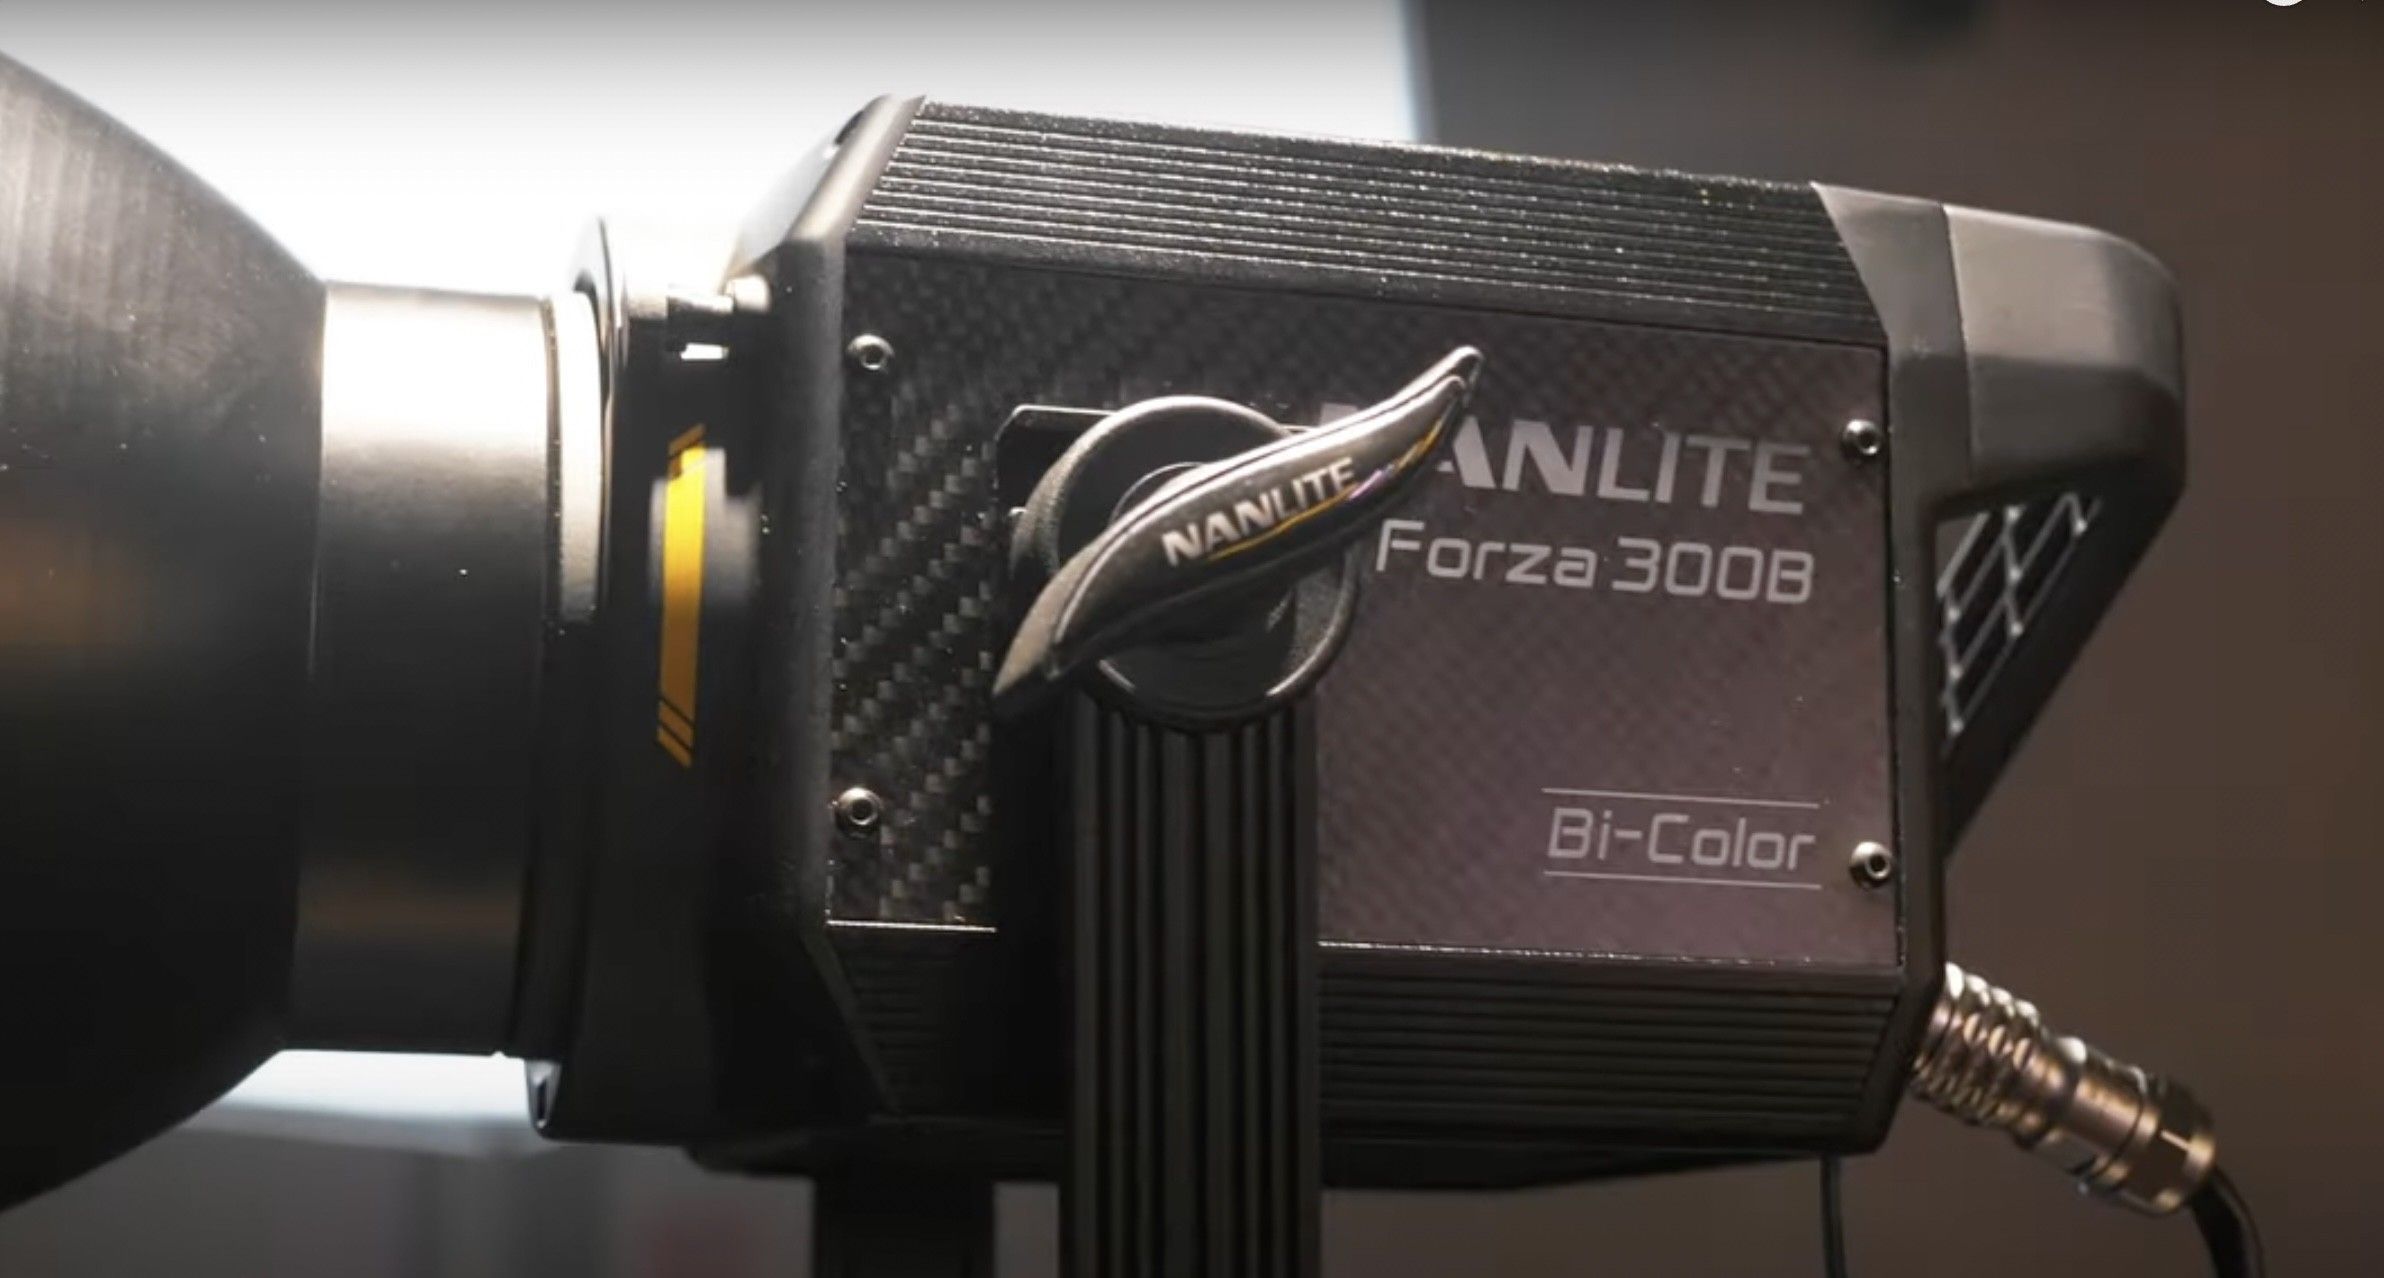 Nanlite's Forza 300B Is A Punchy Bi-Color LED